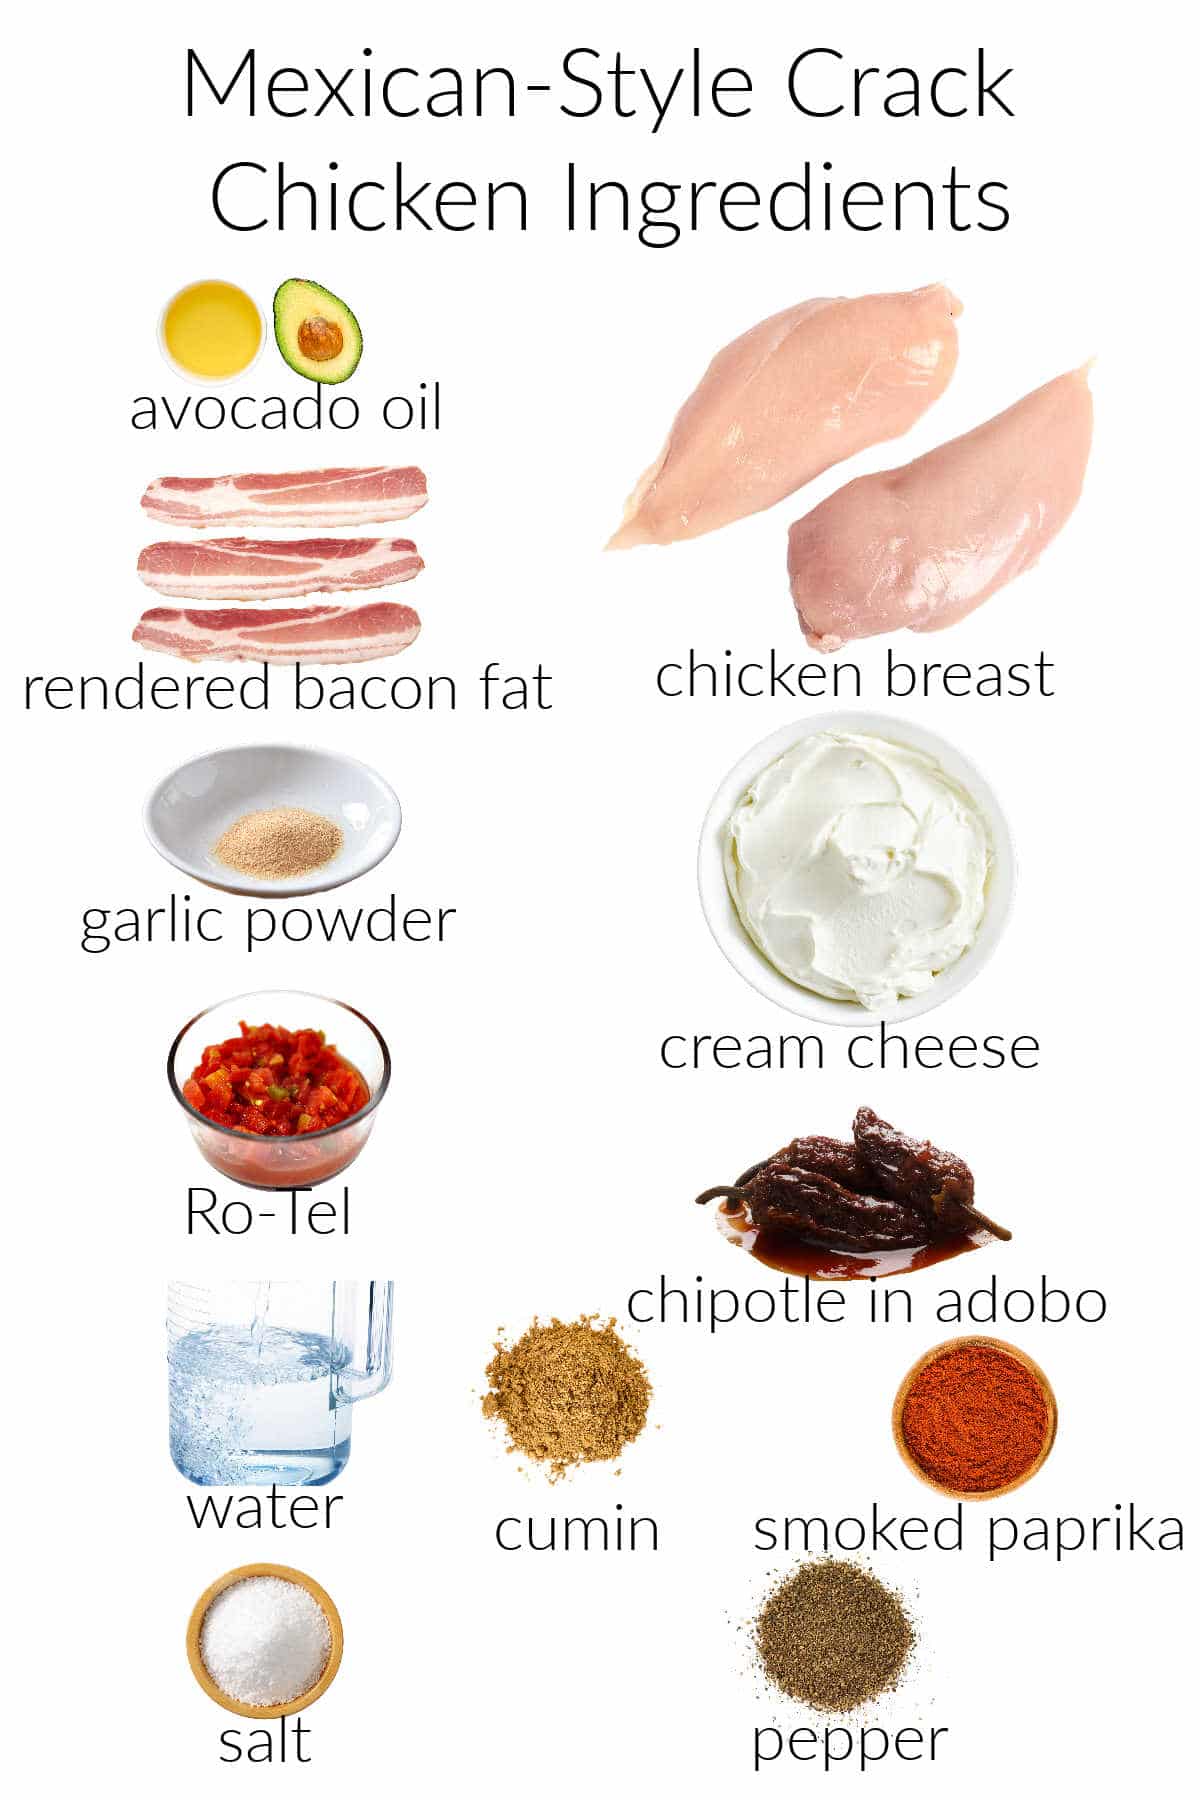 A collage of ingredients for crack chicken.